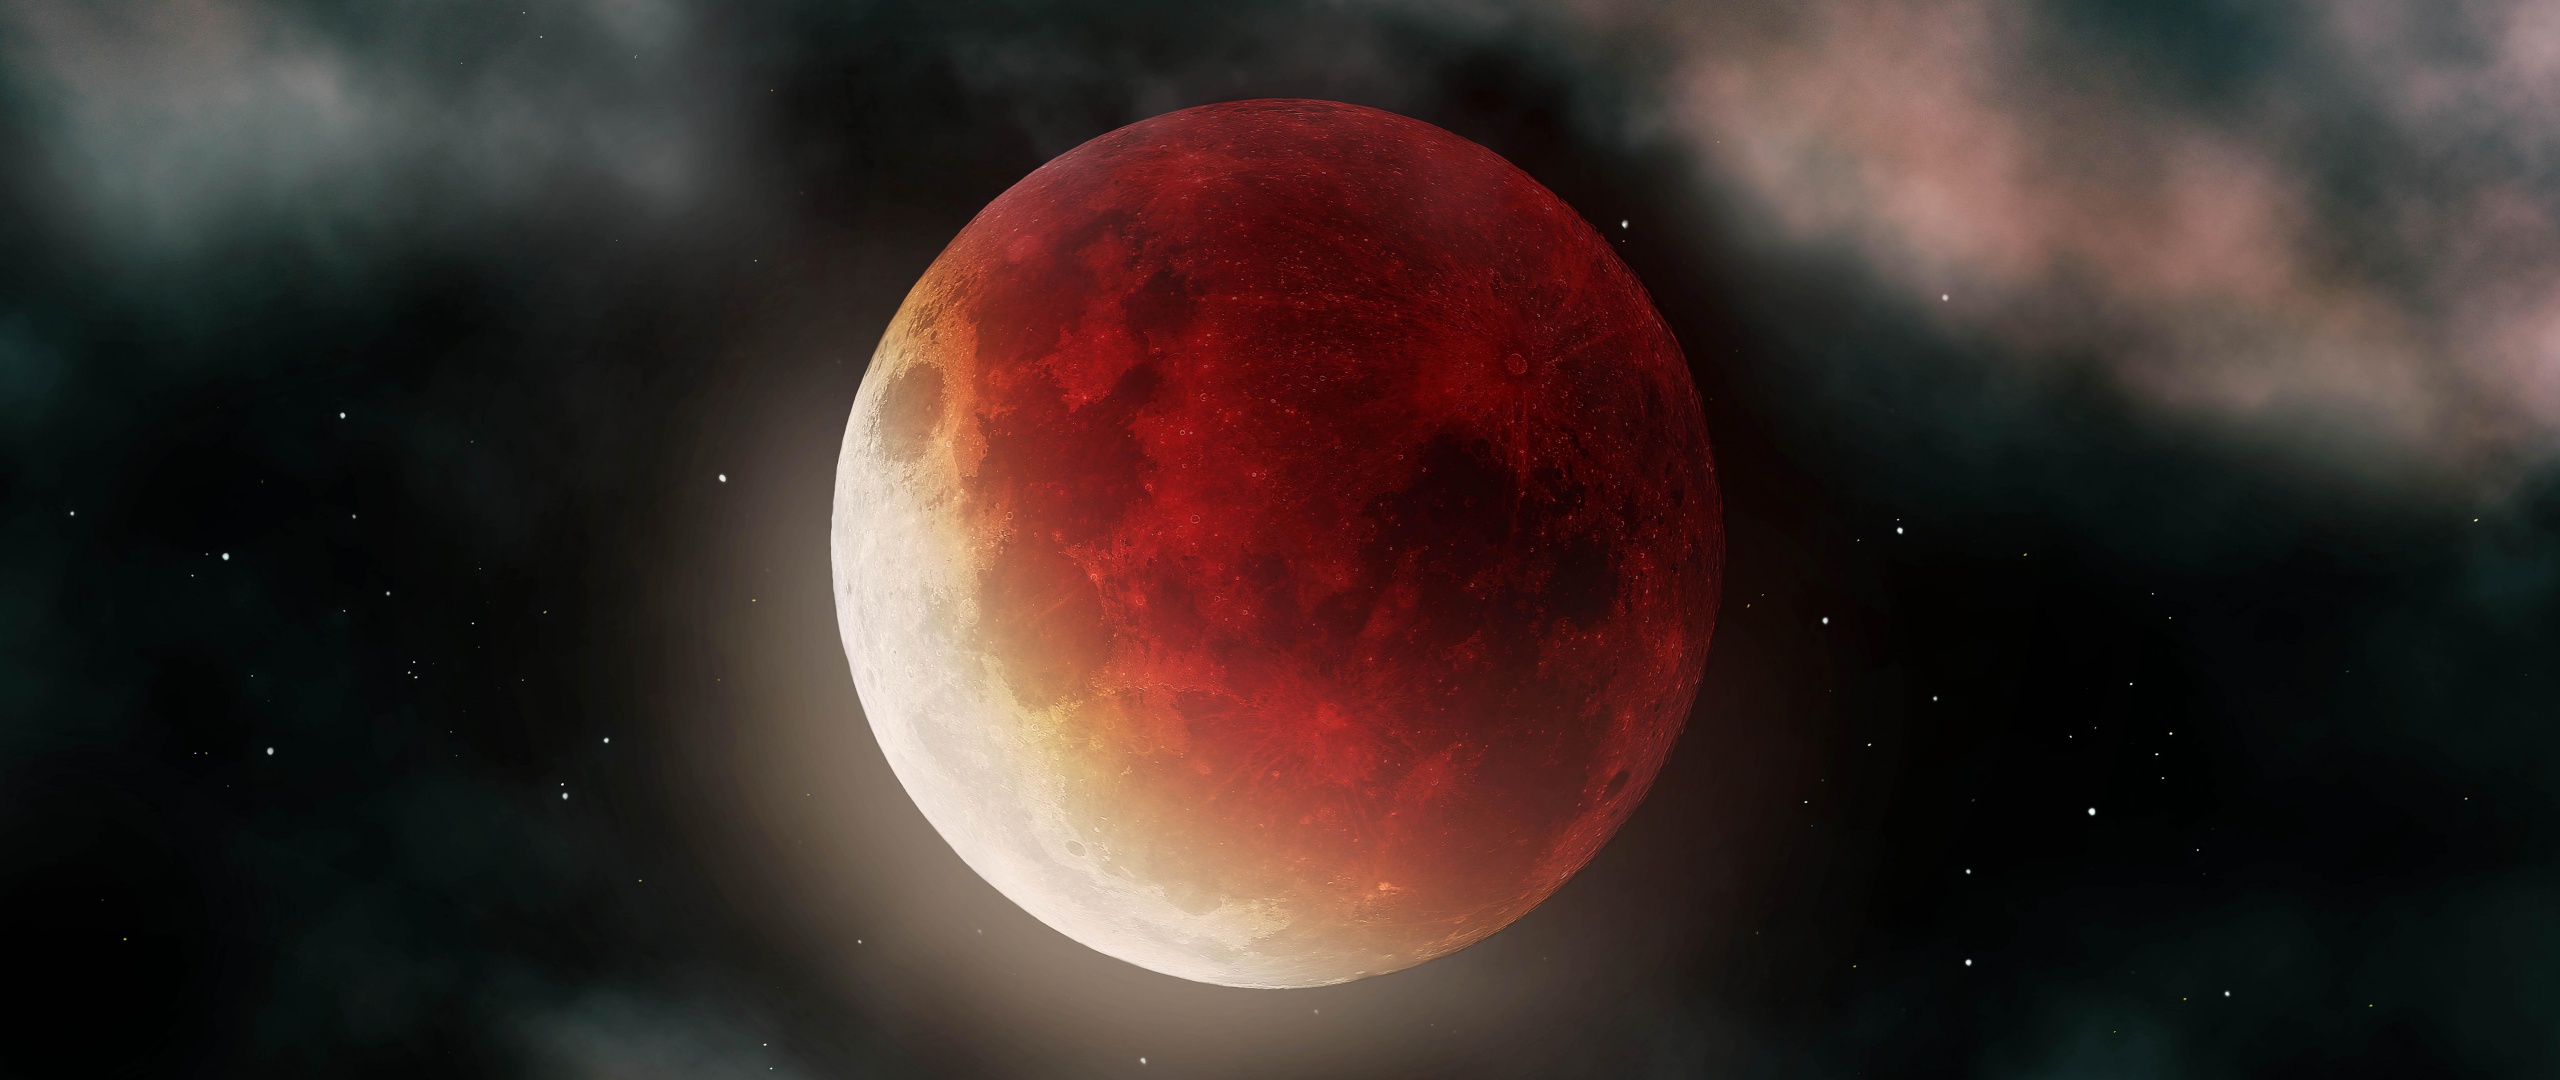 Castle Night Blood Moon Background Wallpaper Image For Free Download   Pngtree